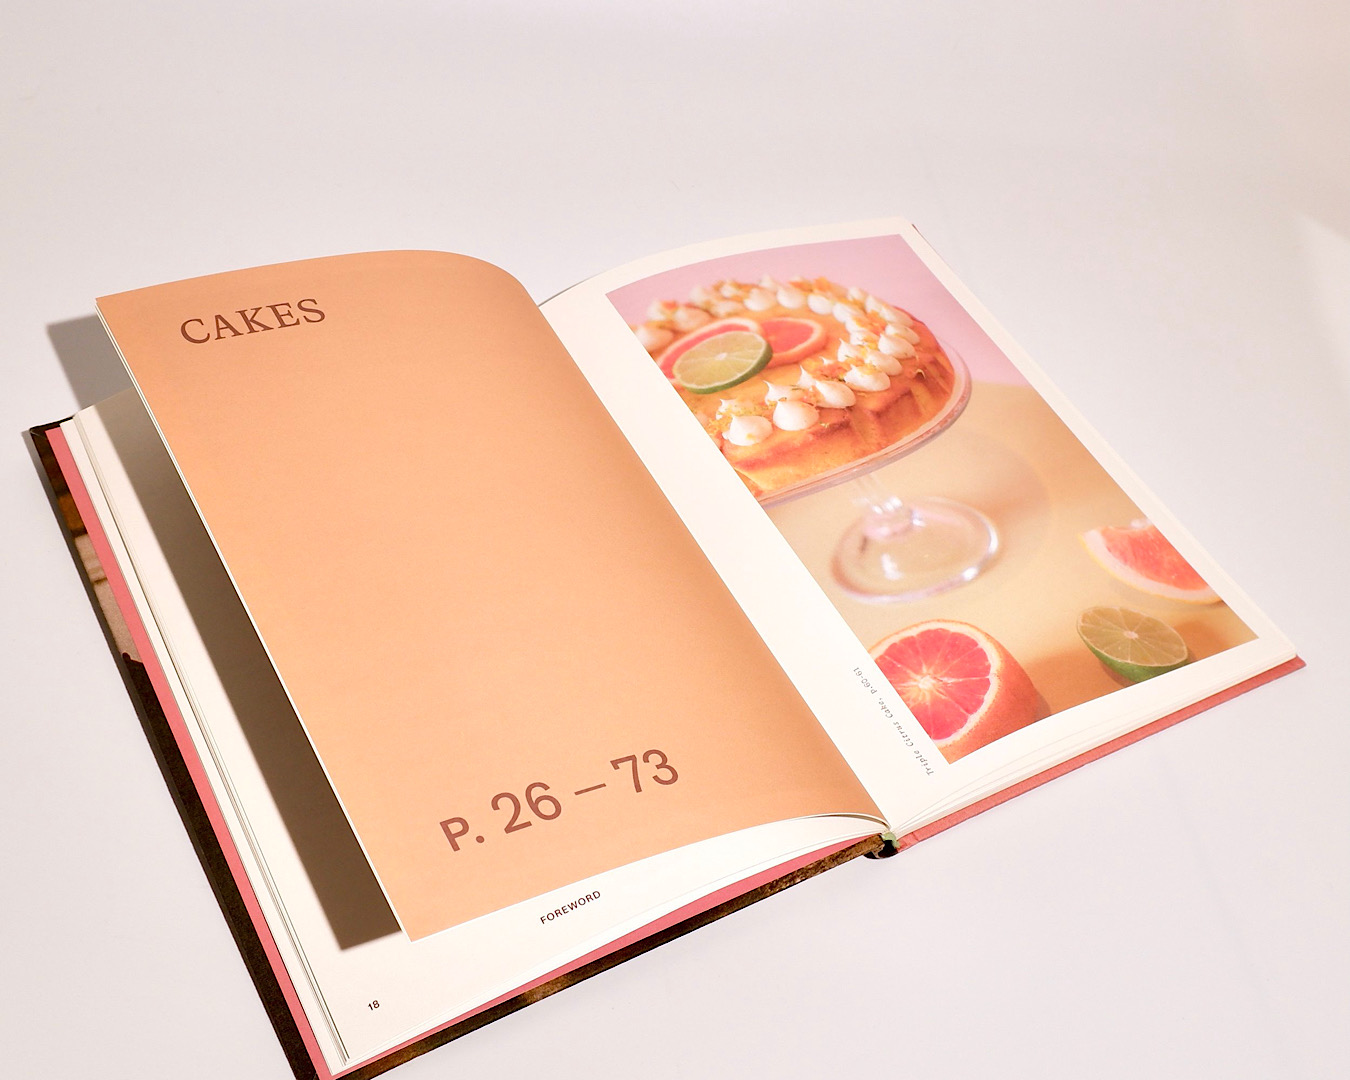 A recipe book lies open on the cakes page. Overleaf is a stunning cake topped with mini meringues and slices of citrus. 